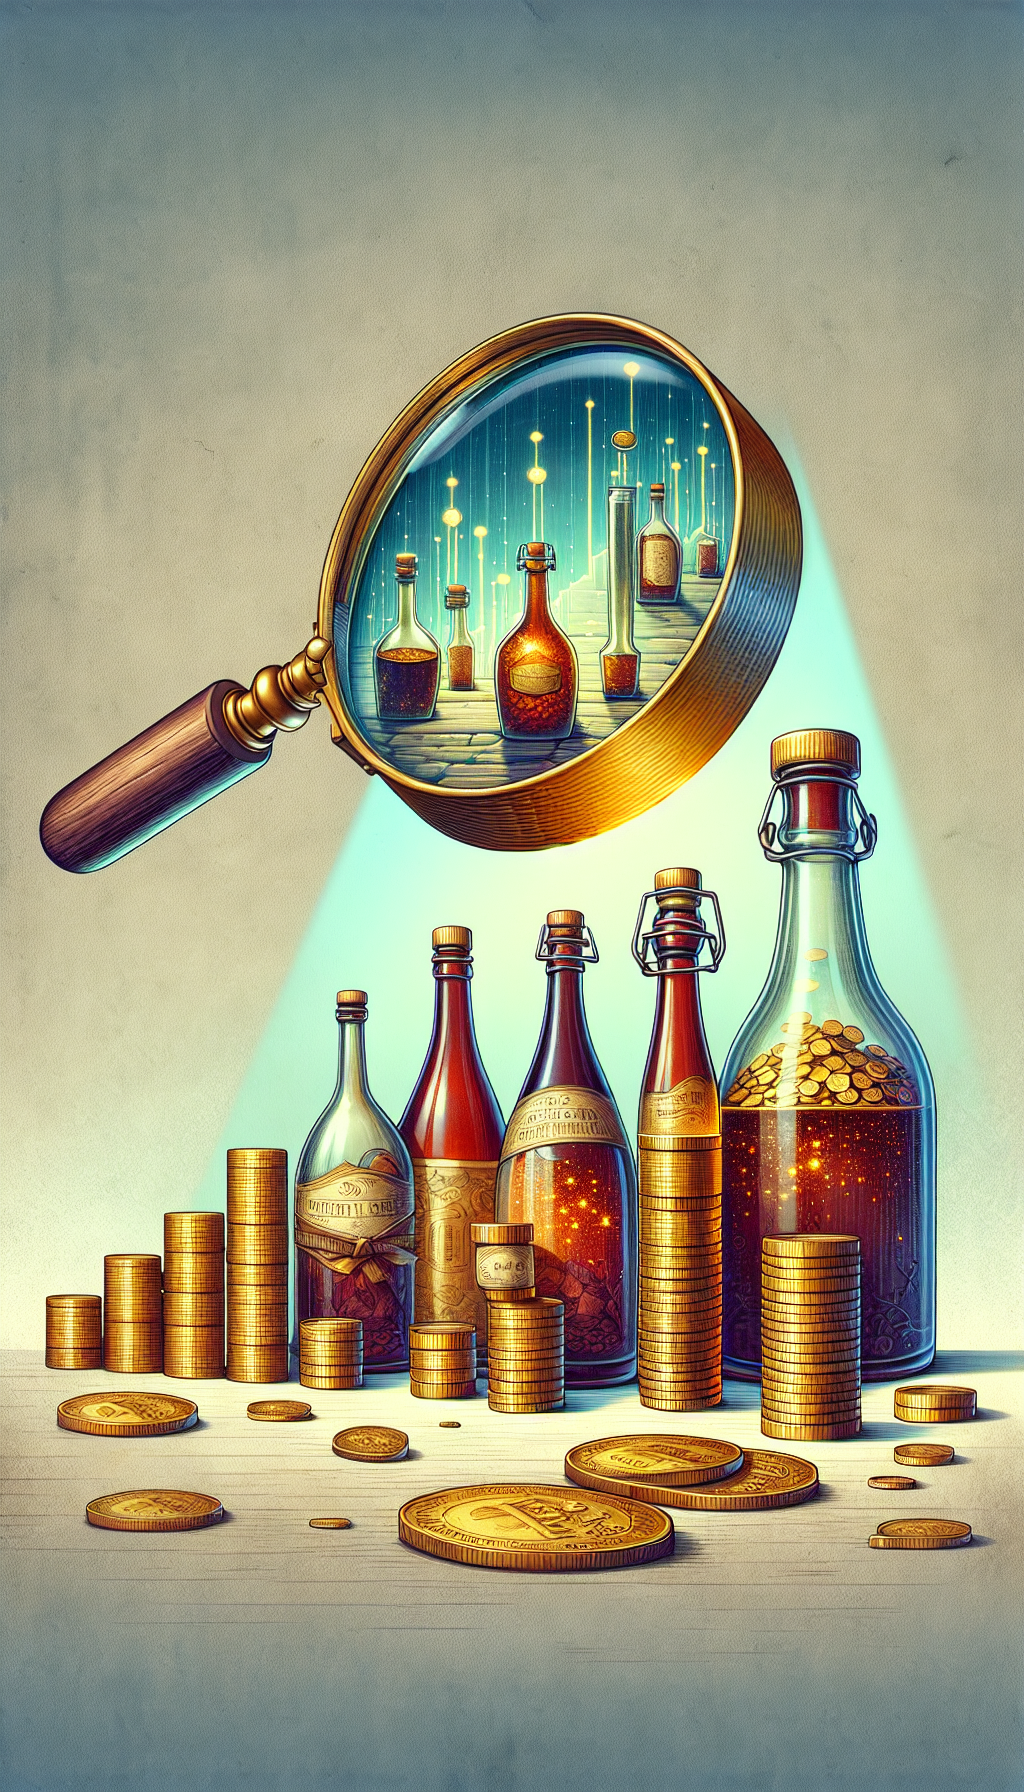 An illustration depicts an antique appraisal scene, where a magnifying glass looms over a line of old syrup bottles, each reflecting a different condition level from pristine to cracked. Beneath the glass, the bottles metamorphose into a bar chart, their heights representing their values, with gleaming golden coins stacked beside the most pristine bottle to convey its high valuation.